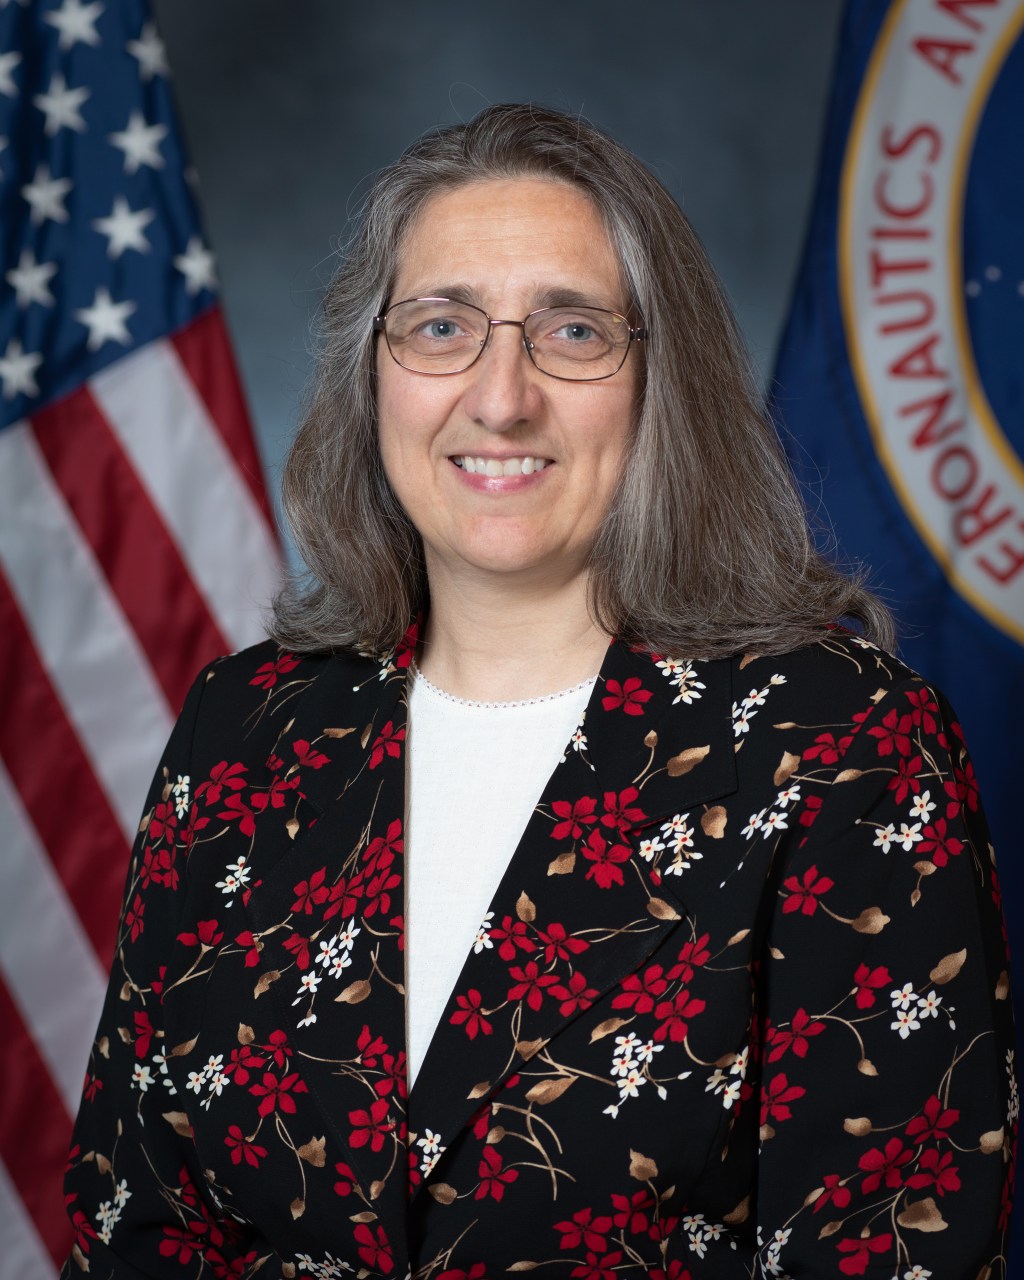 Portrait of Maria Babula with U.S. and NASA flags in background.